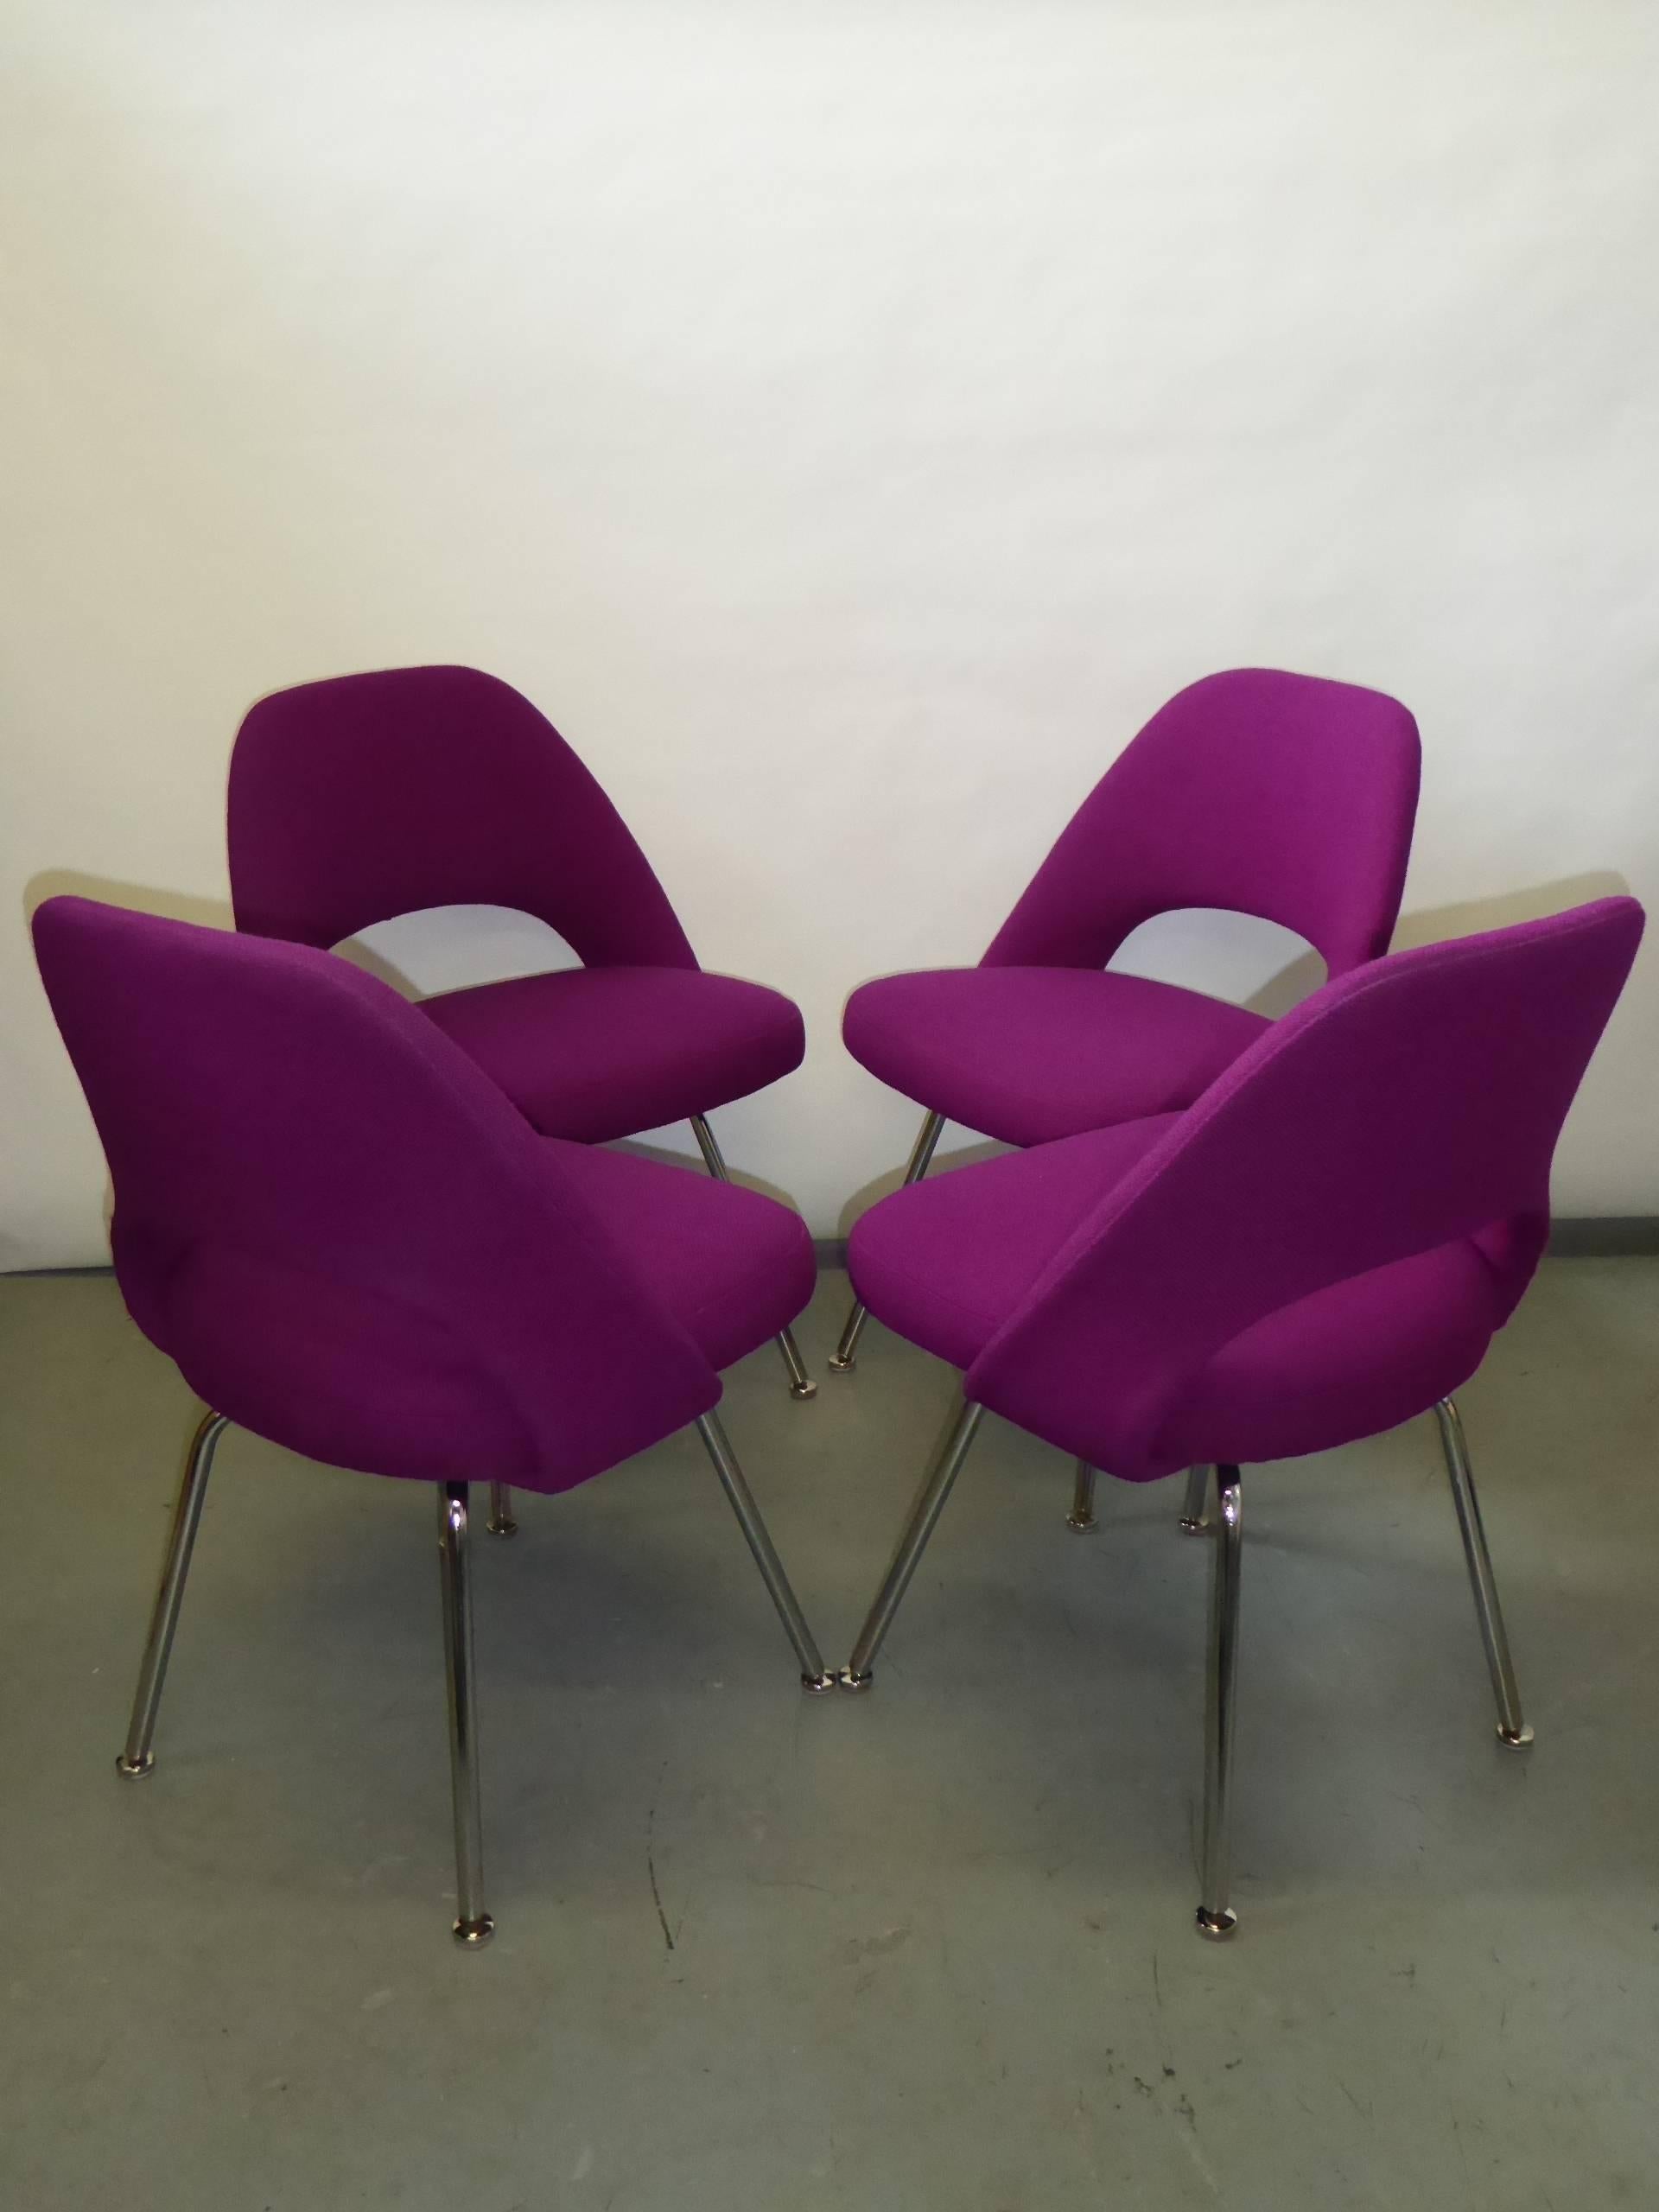 American FOUR 1950s Saarinen No. 71 Series Chairs for Knoll